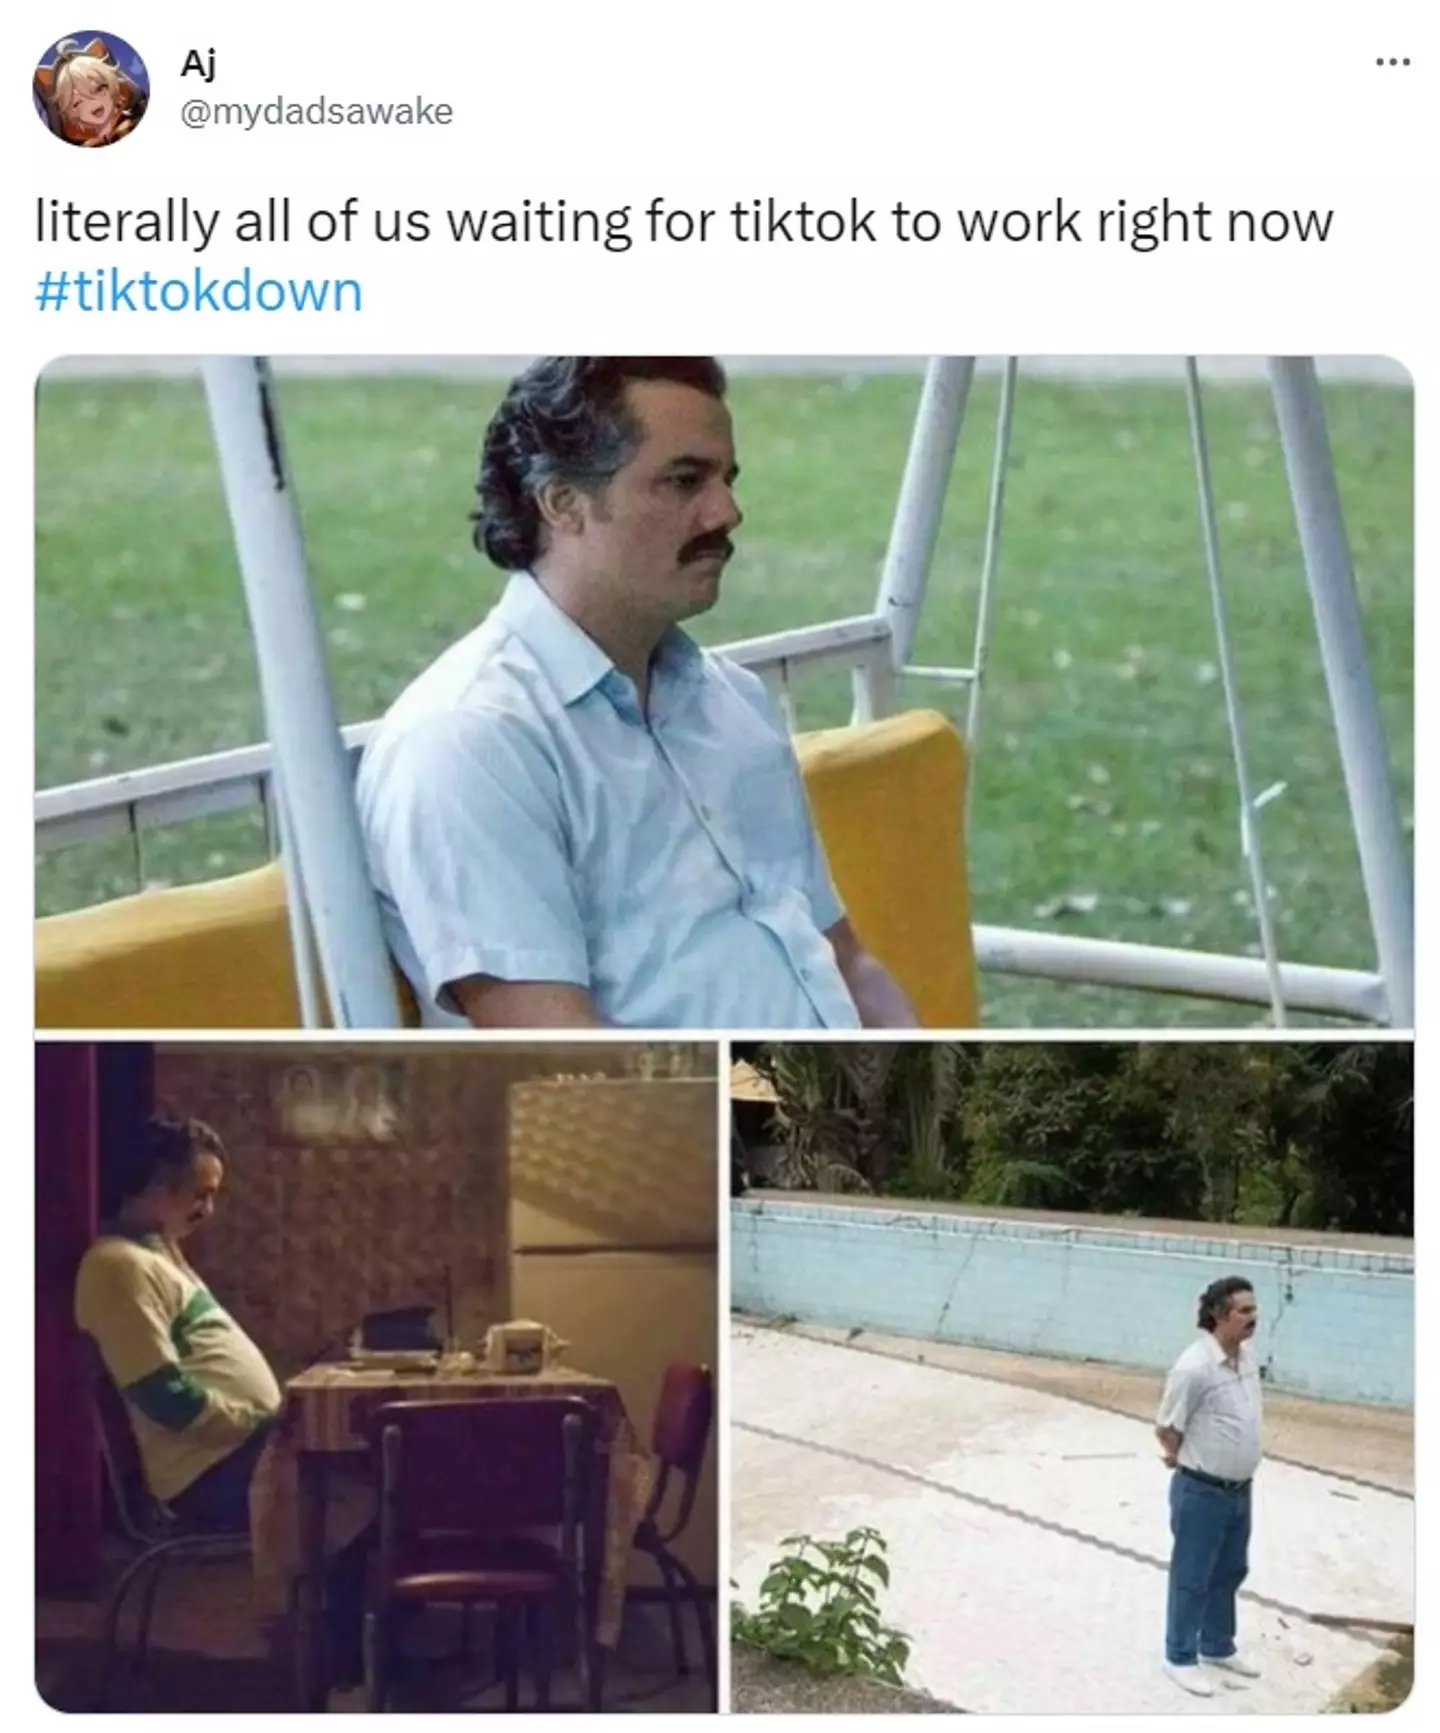 So many people's lives have been put on hold while they wait for TikTok to come back.